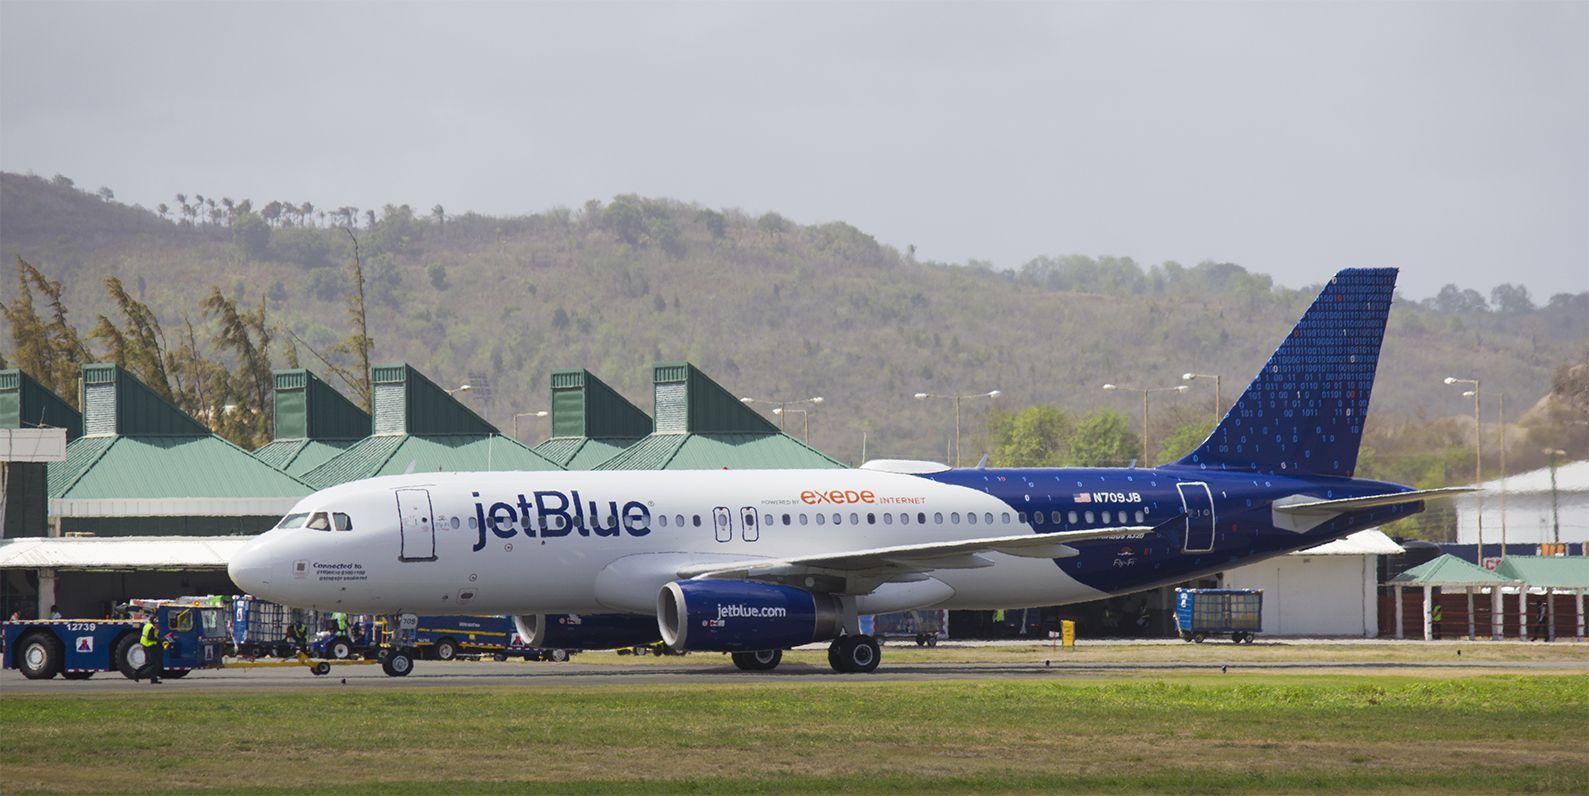 Airbus A320 (N709JB) - Jetblue blessed me with their latest livery today fly-fi